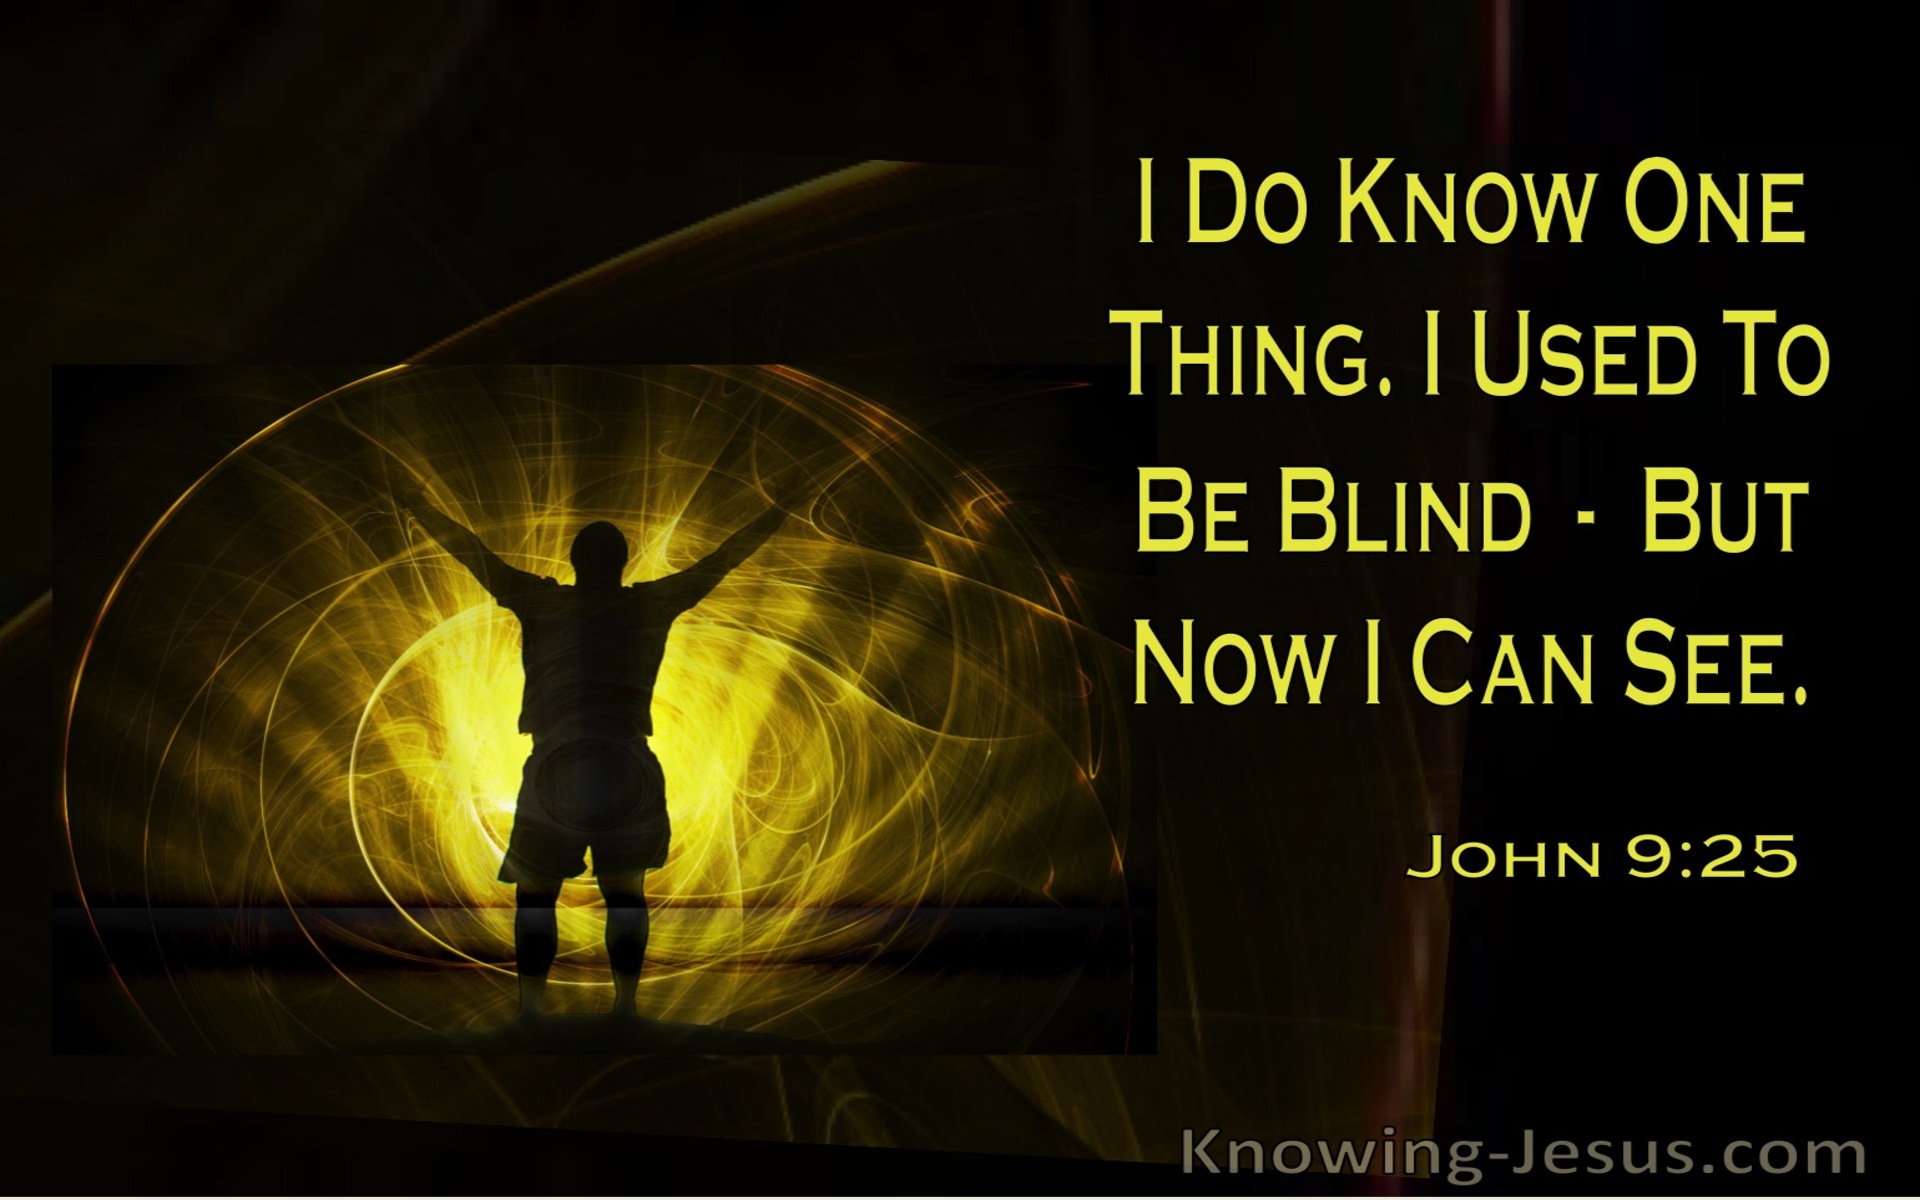 John 9:25 Once I Was Blind But Now I See (windows)07:09